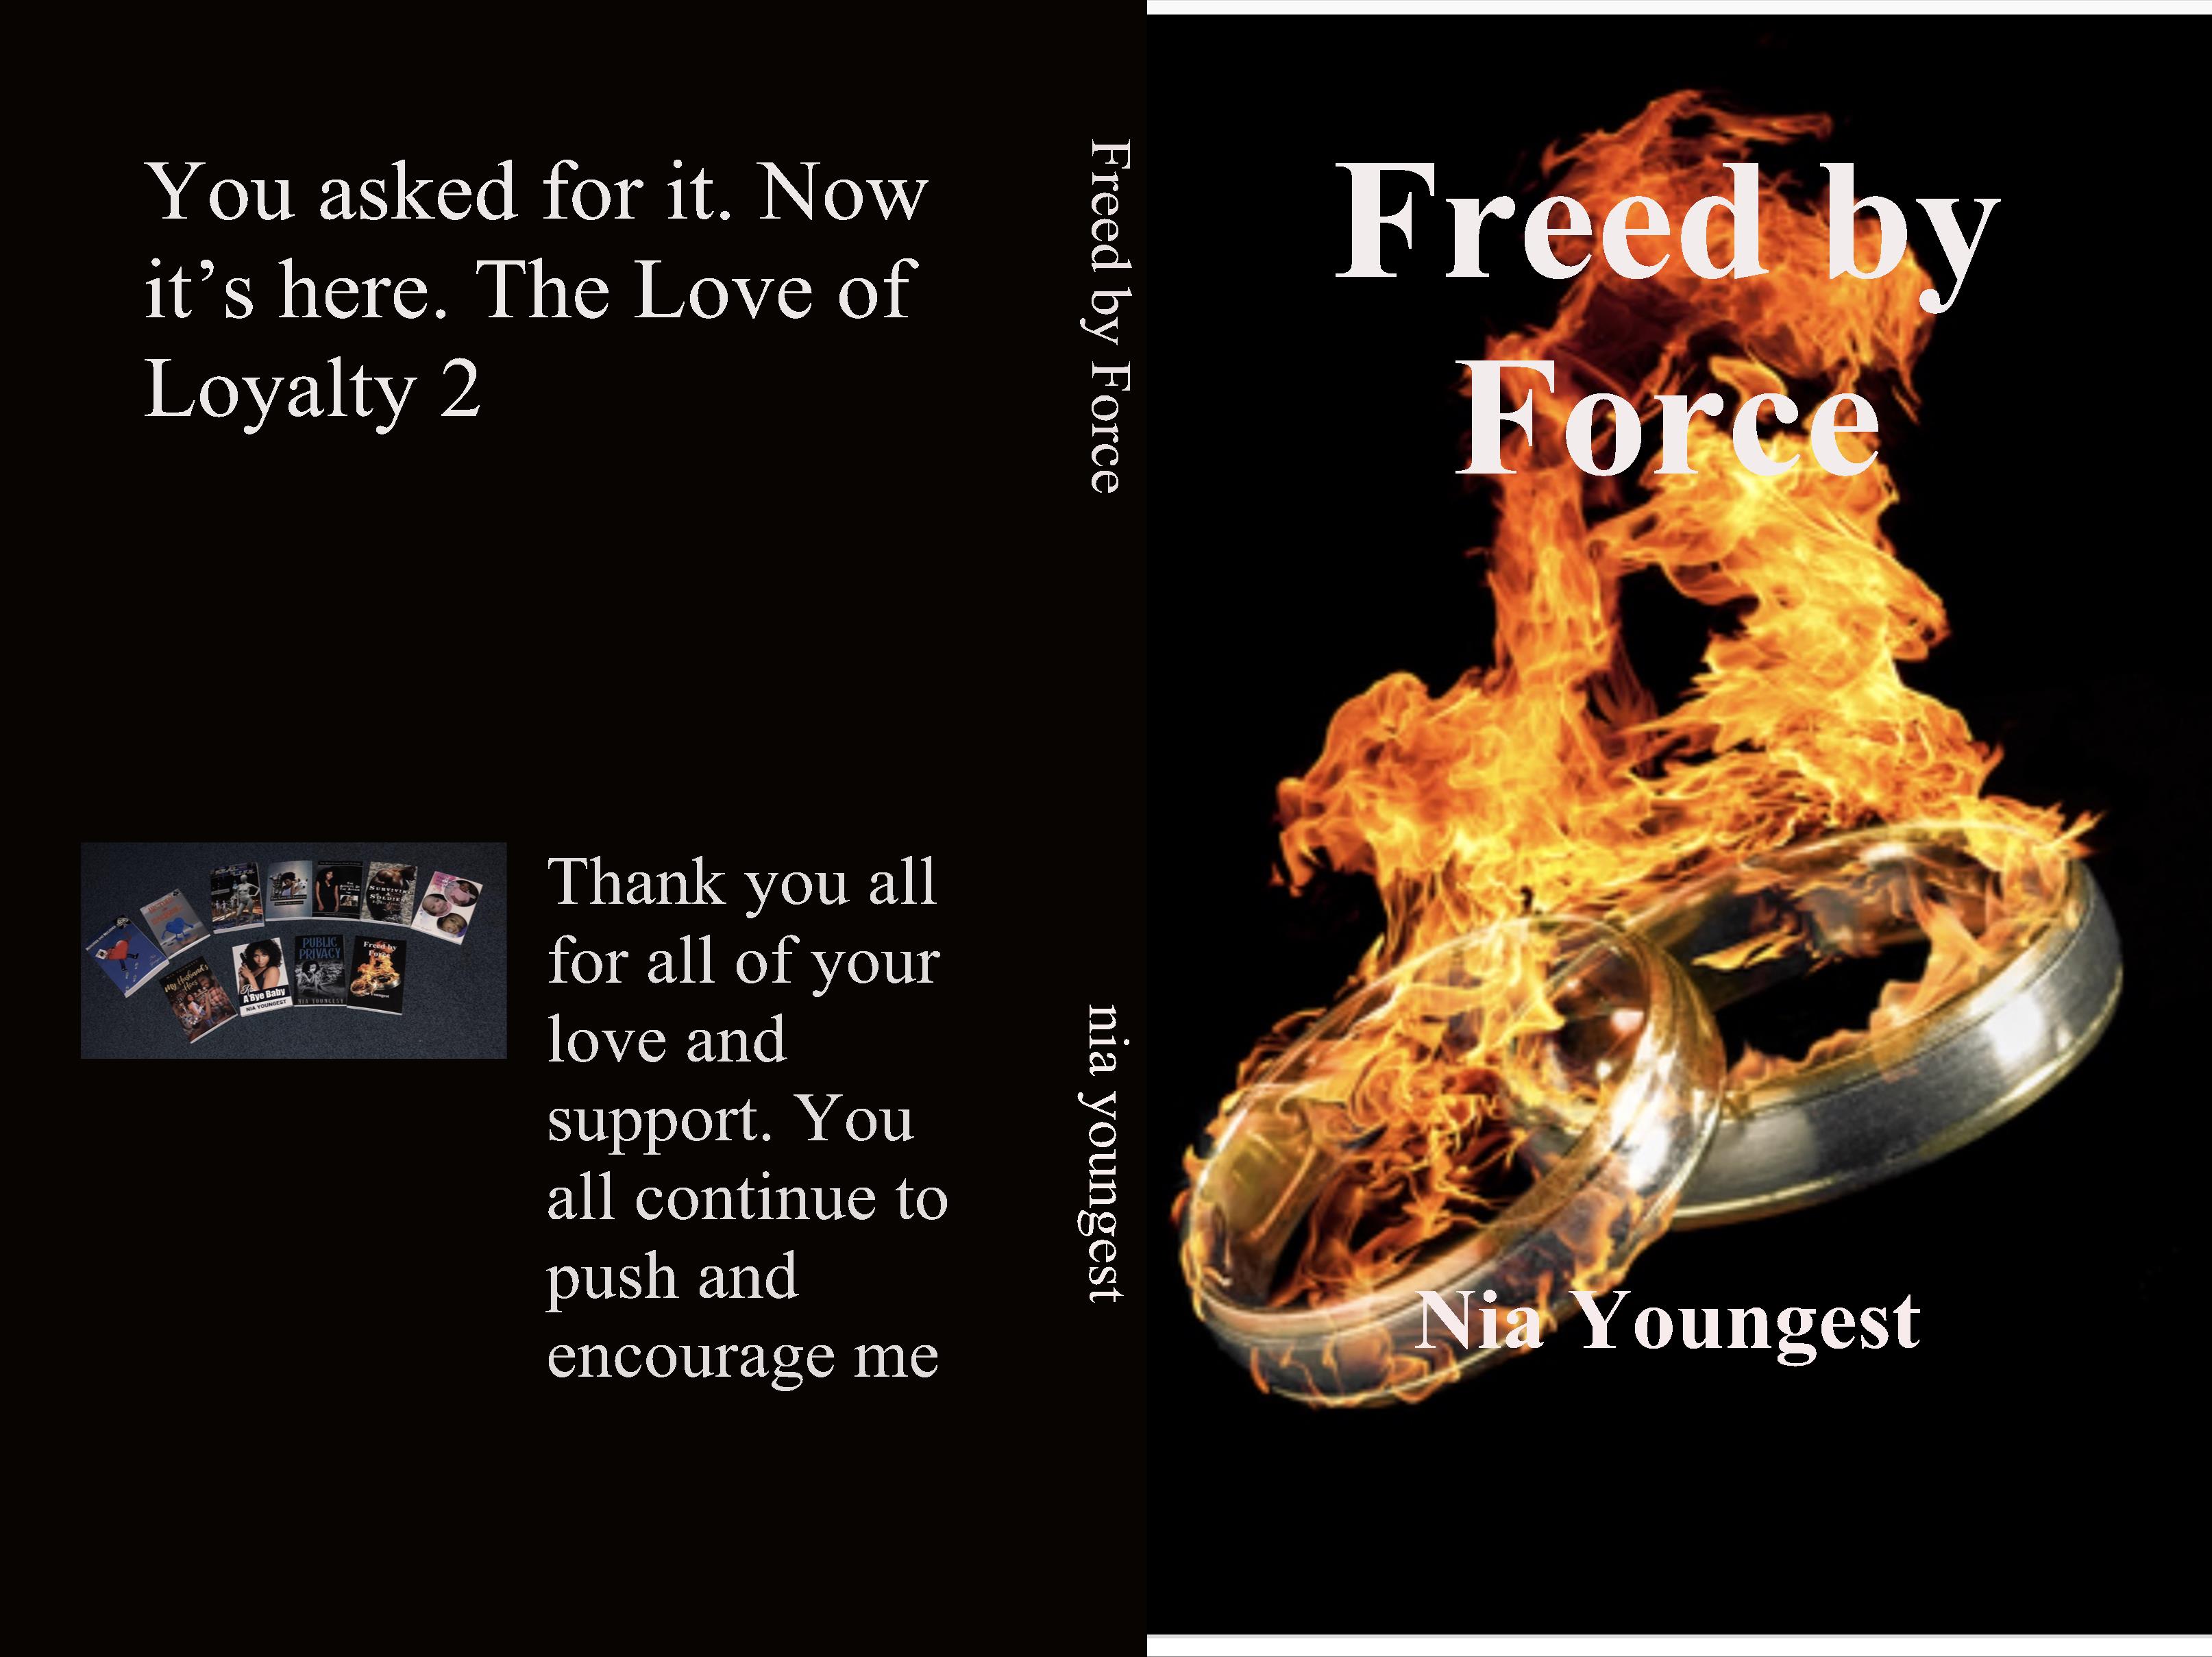 Freed by Force cover image